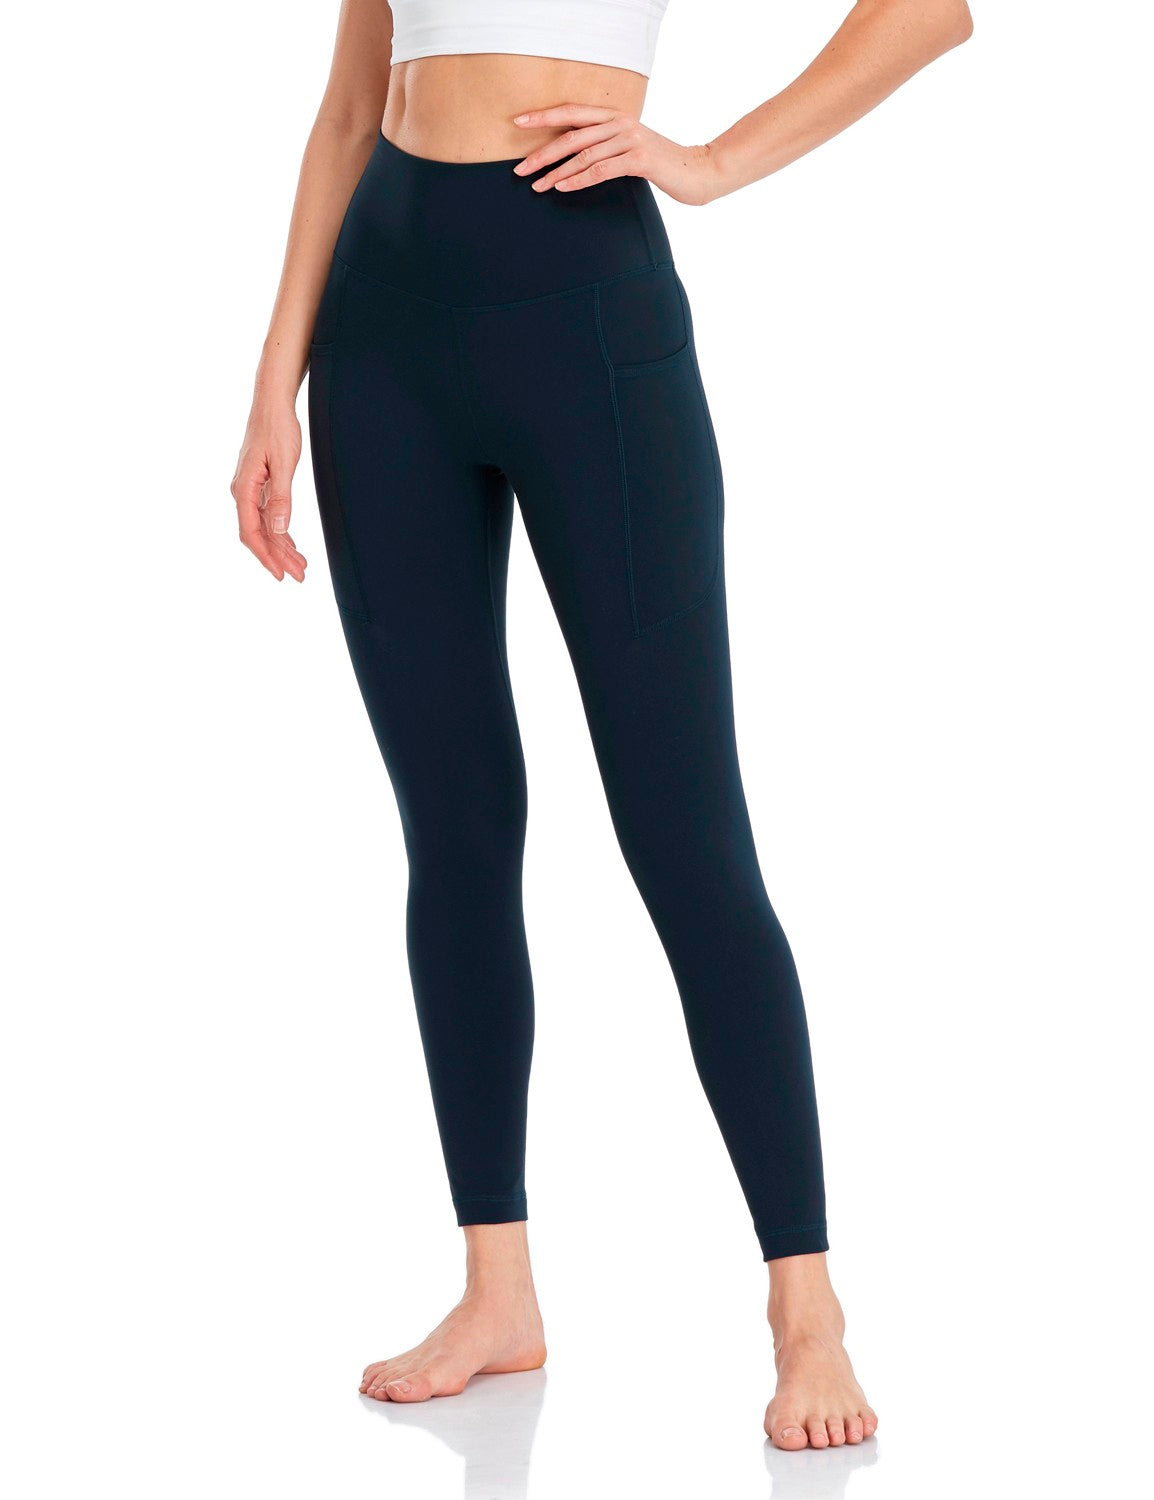 HeyNuts Leggings with Pockets for Women, High Waisted 78